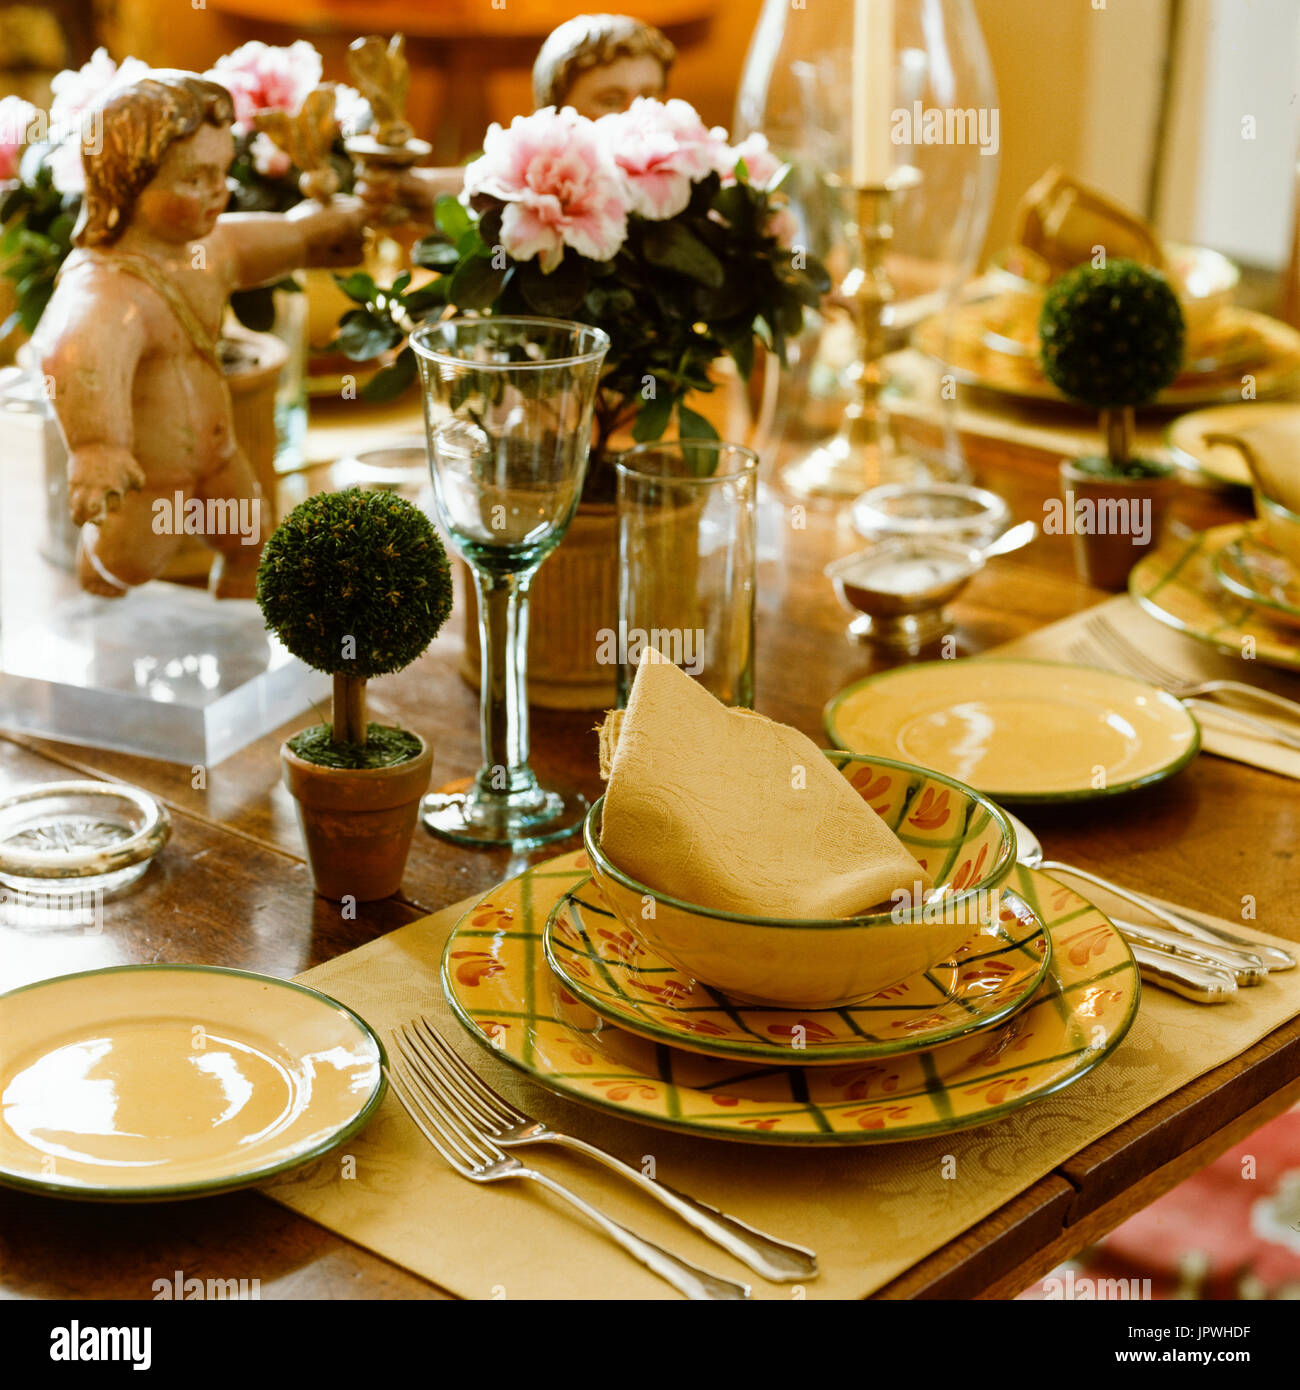 Dining table with tableware decor Stock Photo